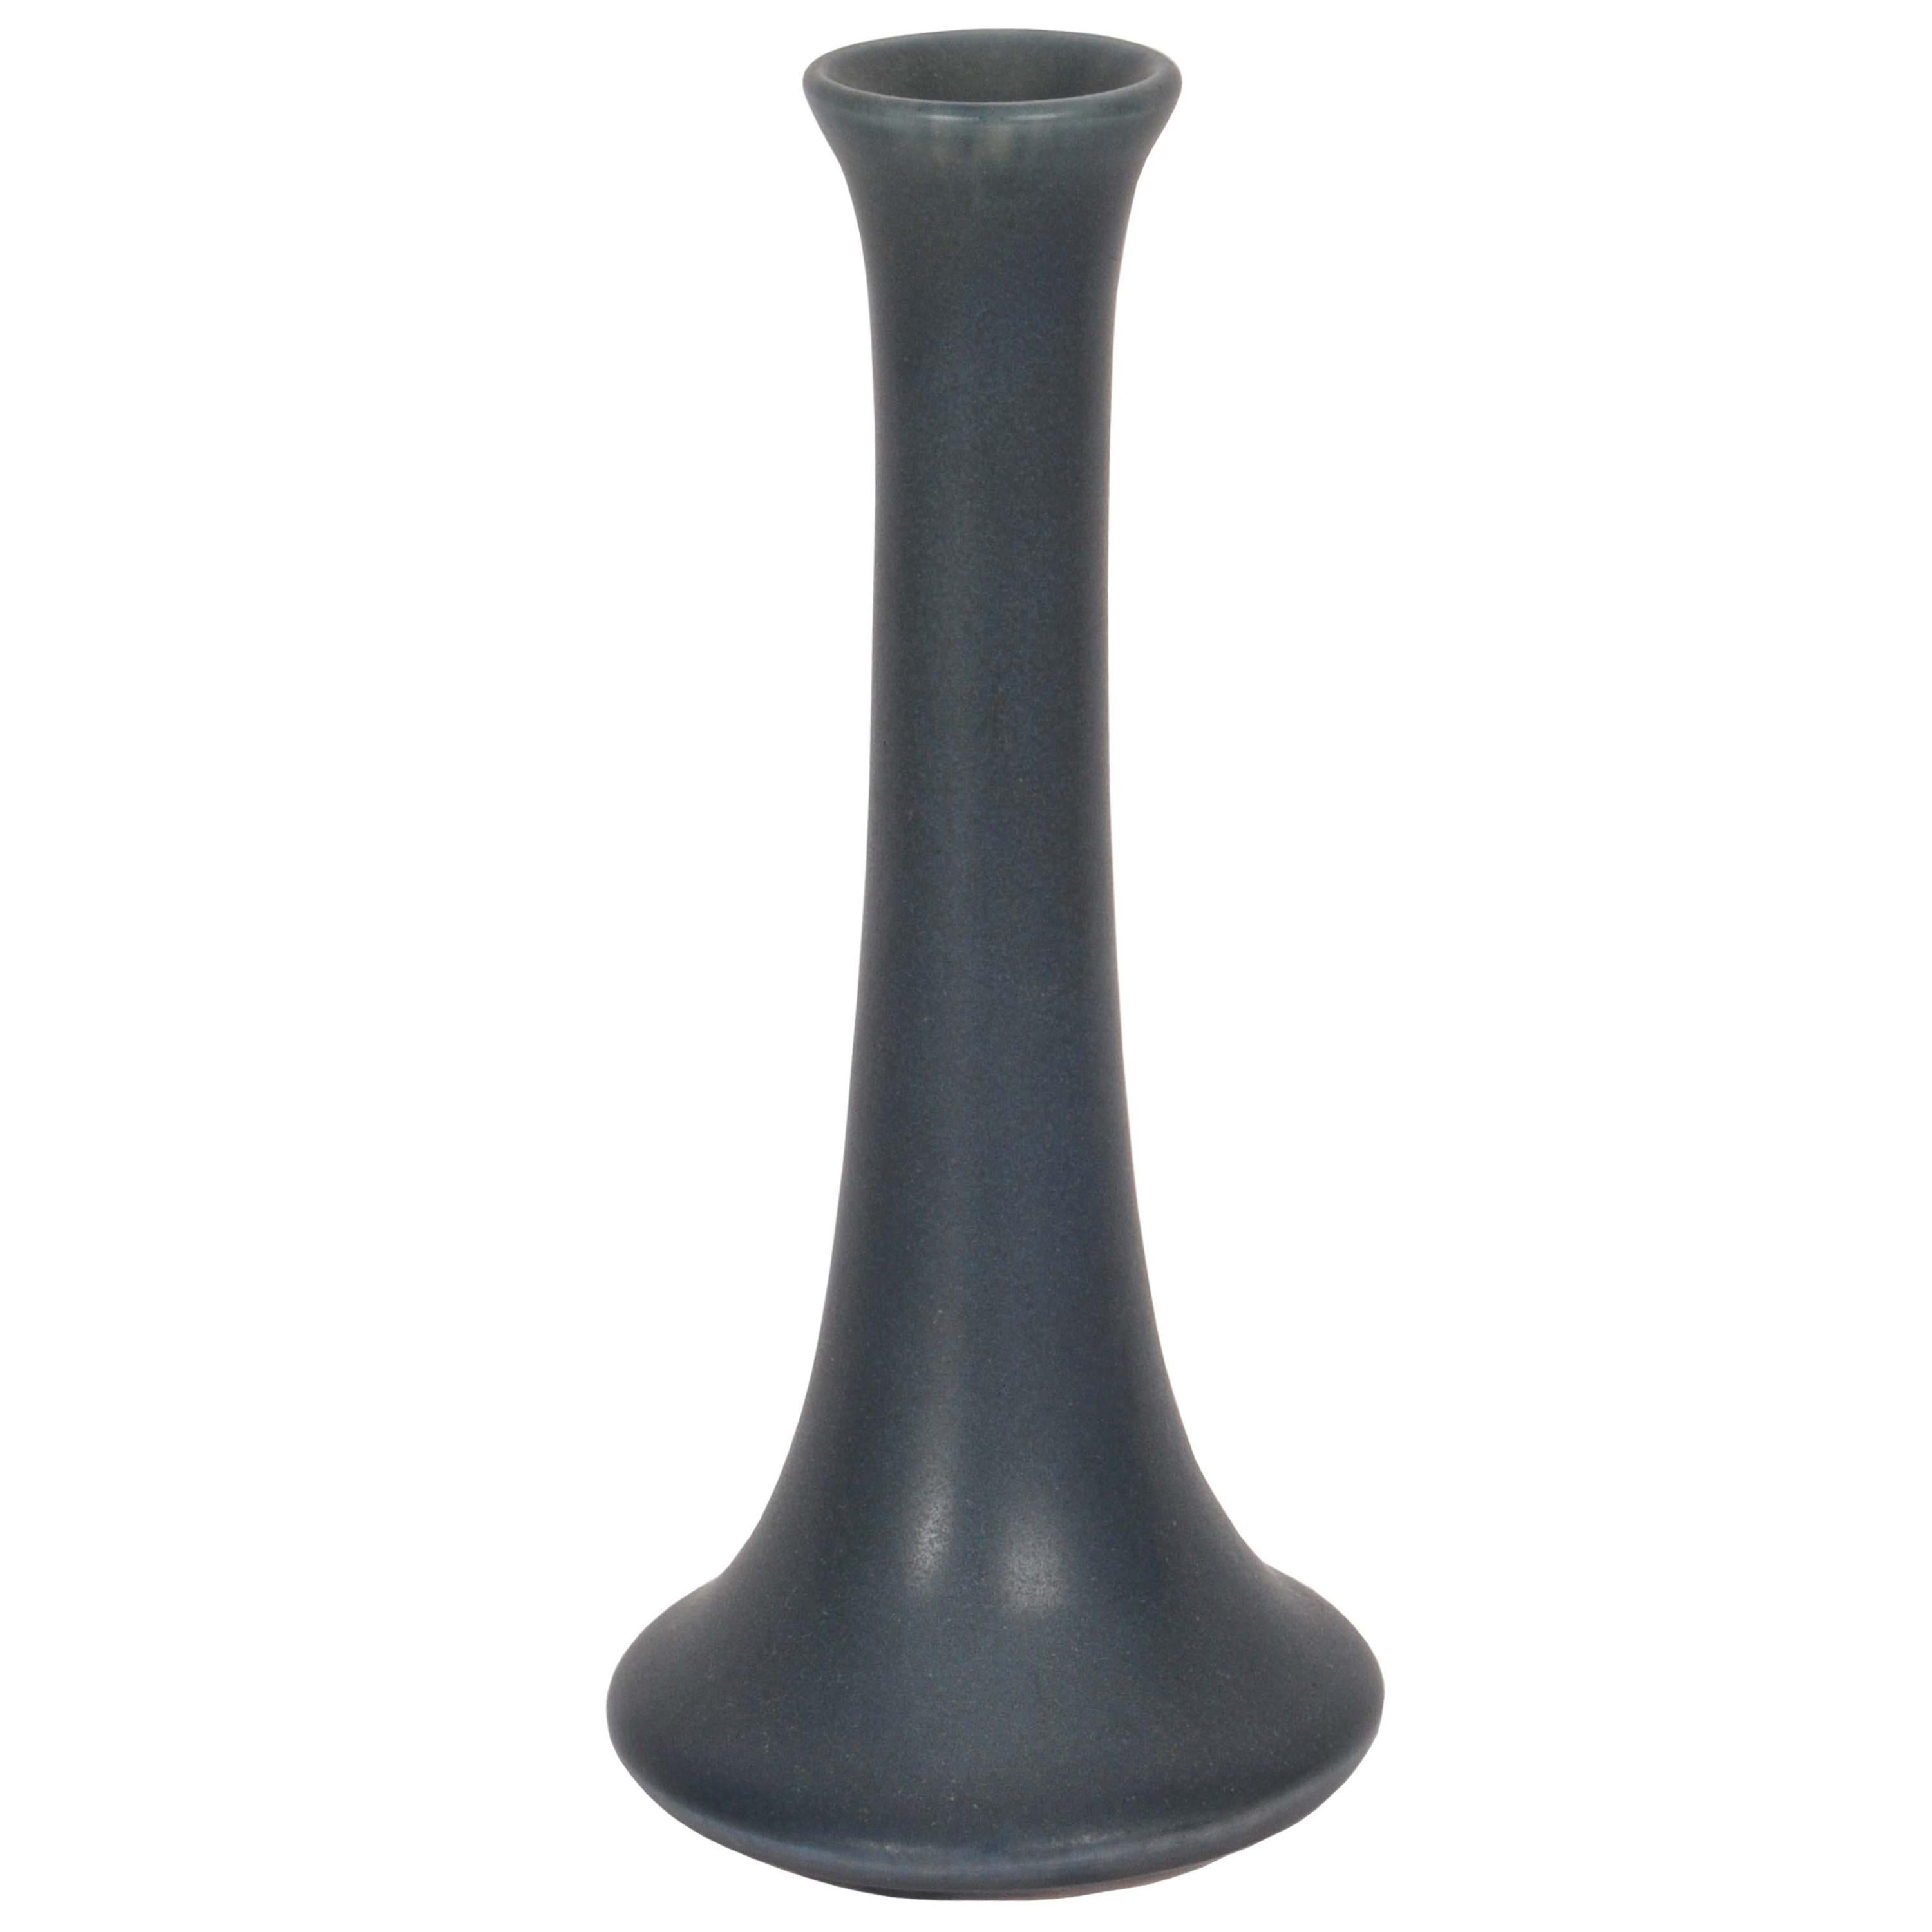 A good antique American Arts and Crafts pottery vase by Rookwood Pottery Co, dated 1917.
The vase having a charcoal color matte glaze with hints of green and blue, the vase of narrow tapering form with a flared foot, marked to the base with the